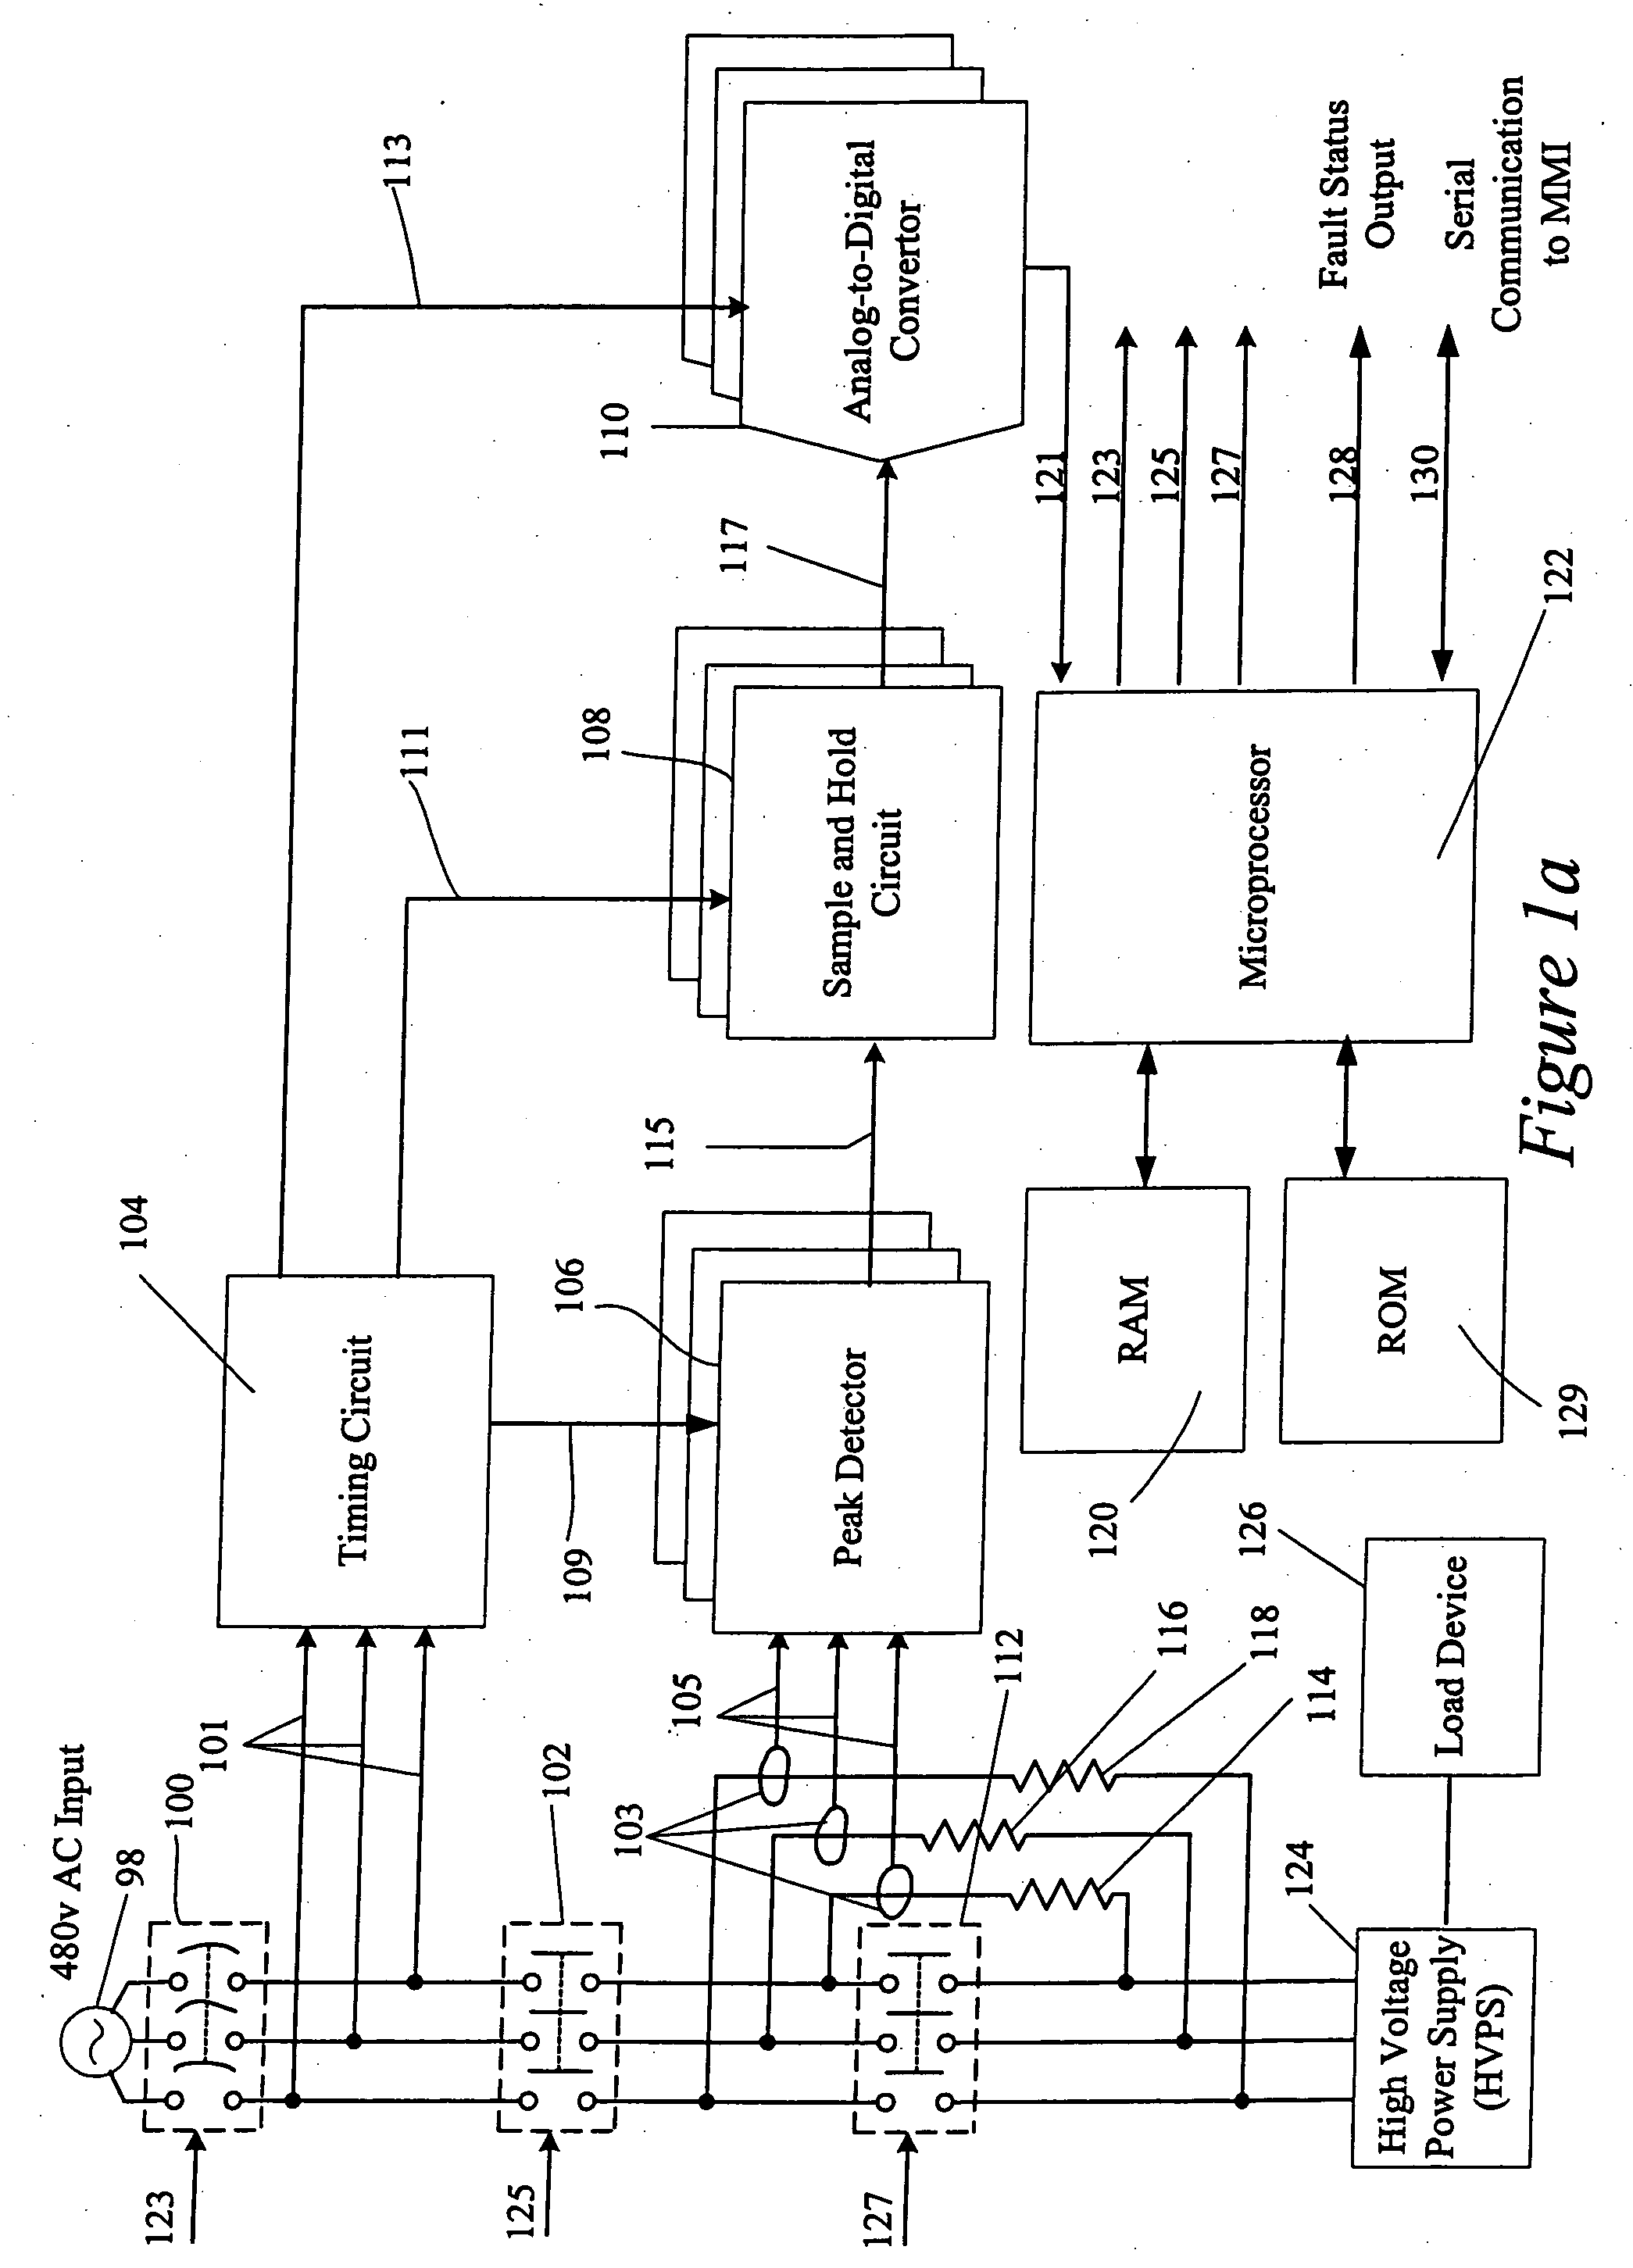 Apparatus, method and computer program product for monitoring AC line current through the step start resistors of a high voltage power supply